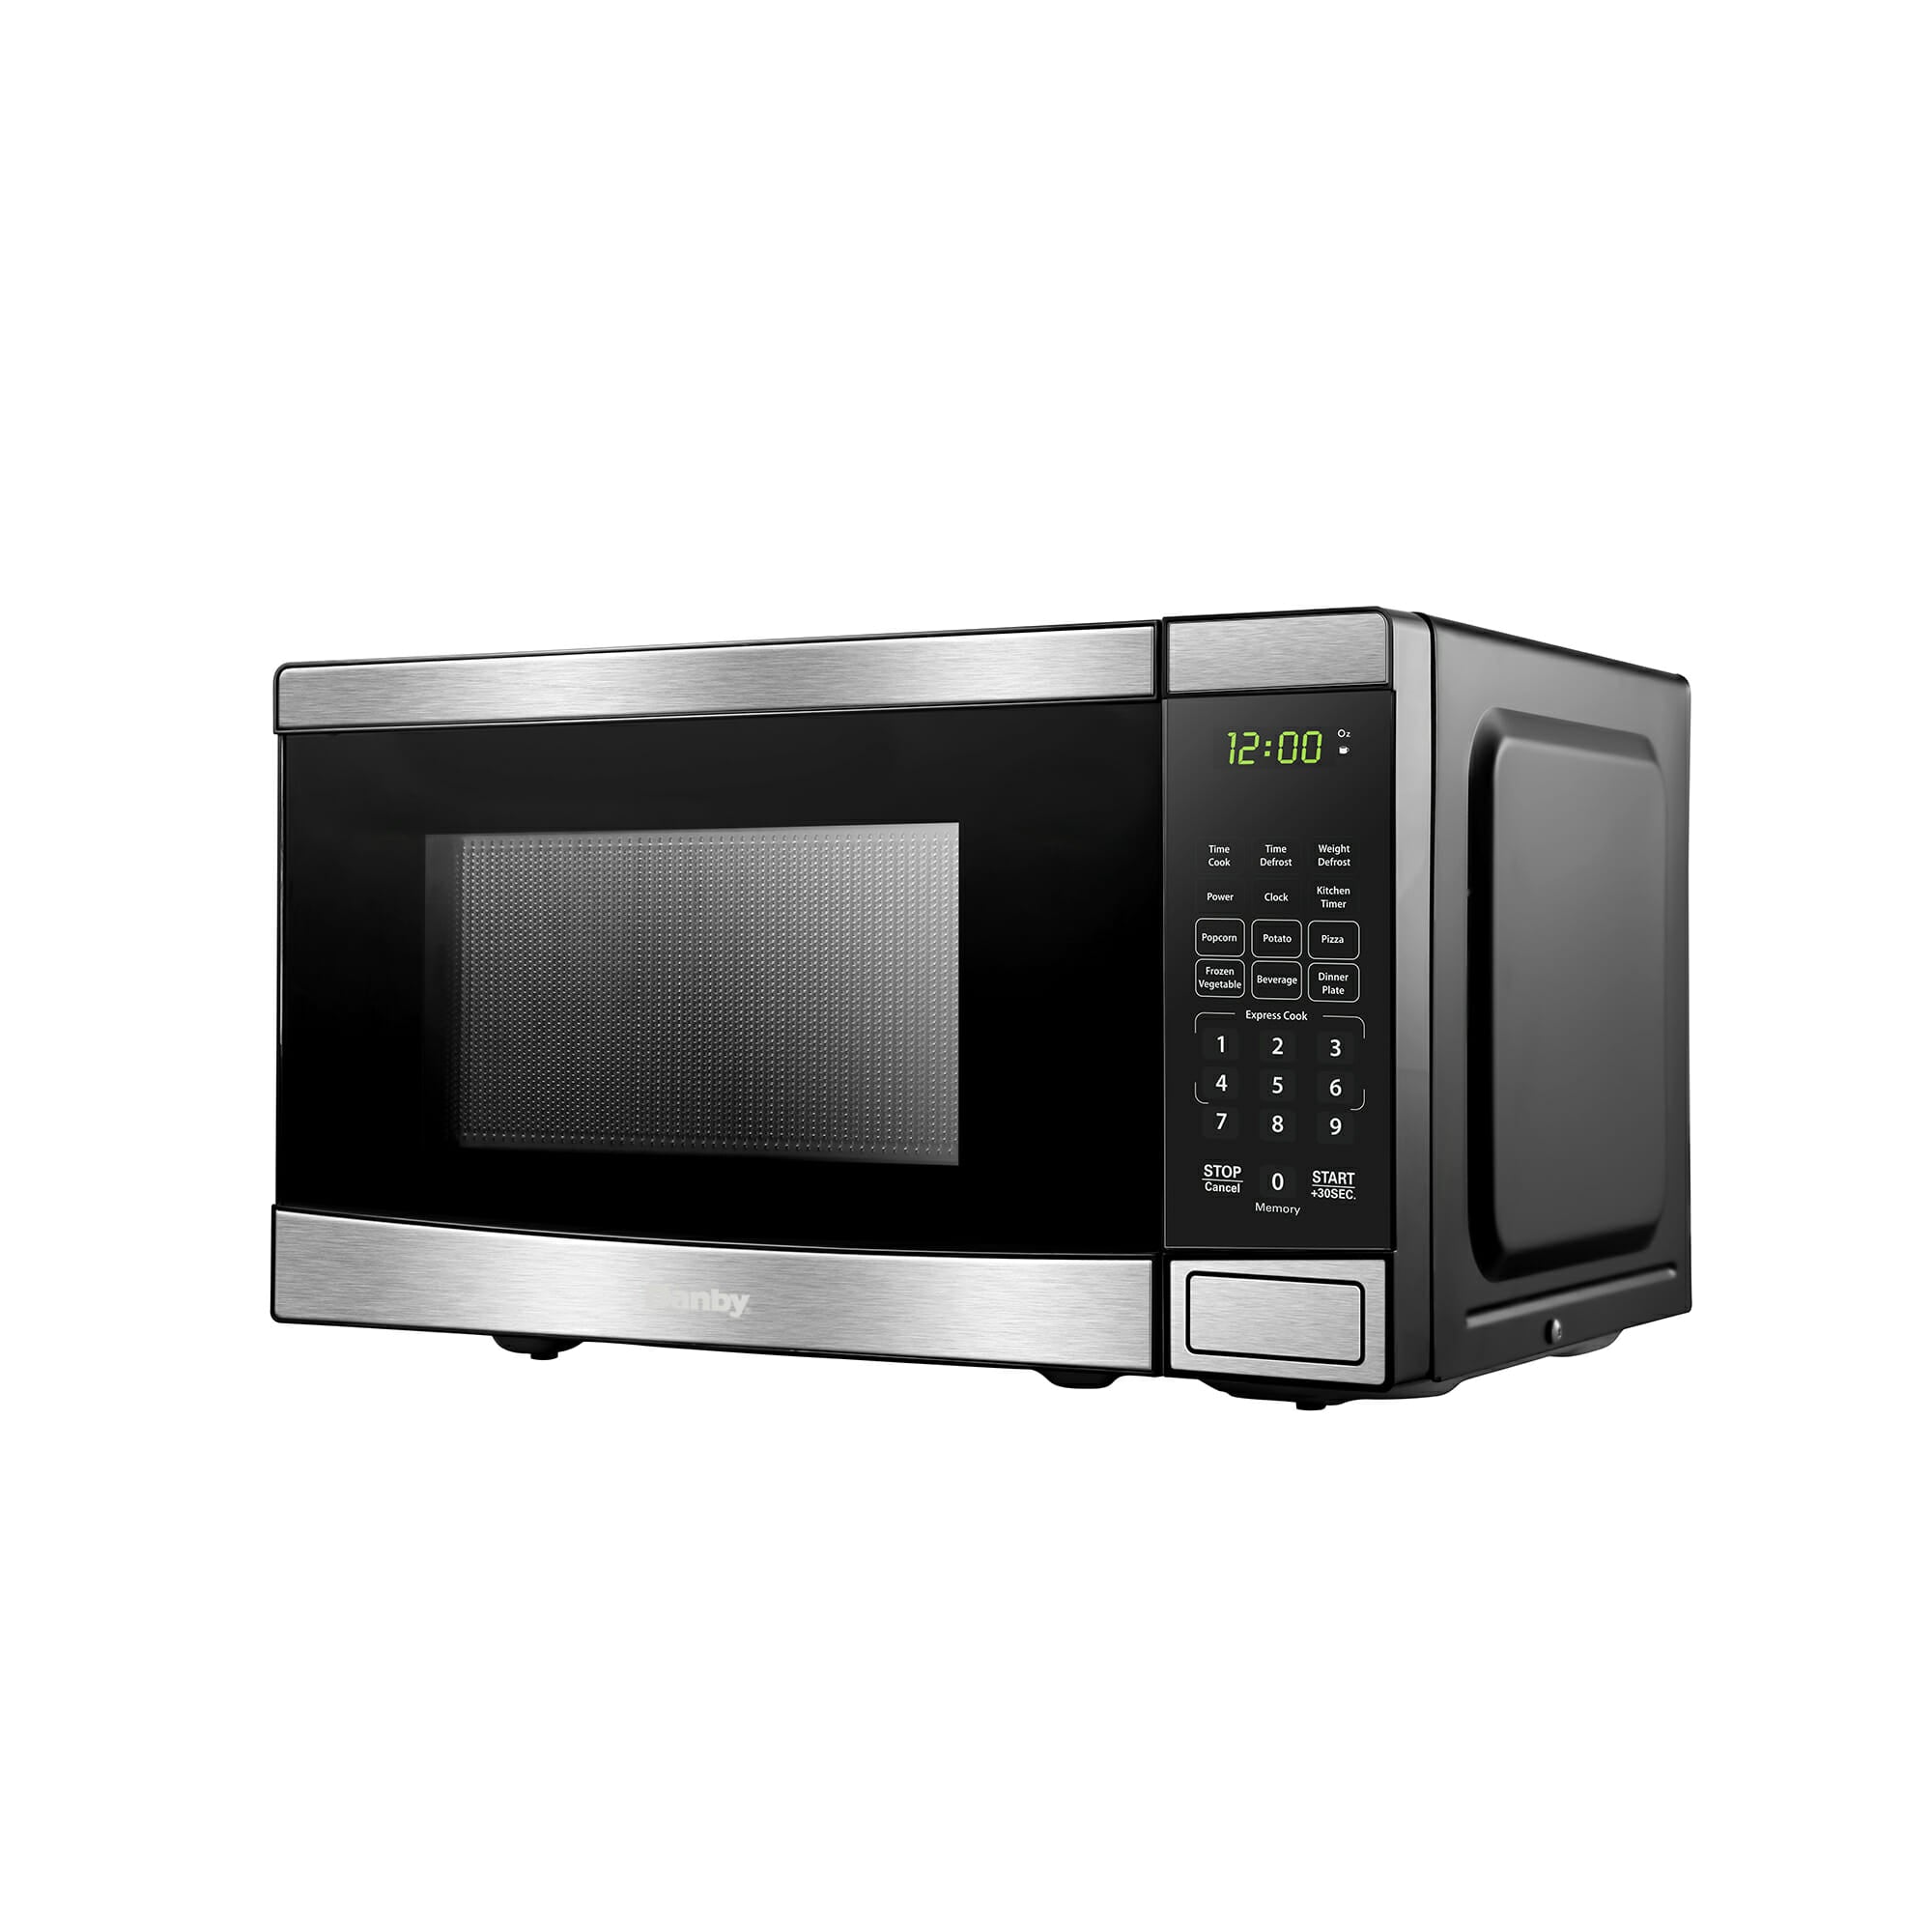 Danby - 0.7 cu. Ft  Counter top Microwave in Stainless - DBMW0721BBS